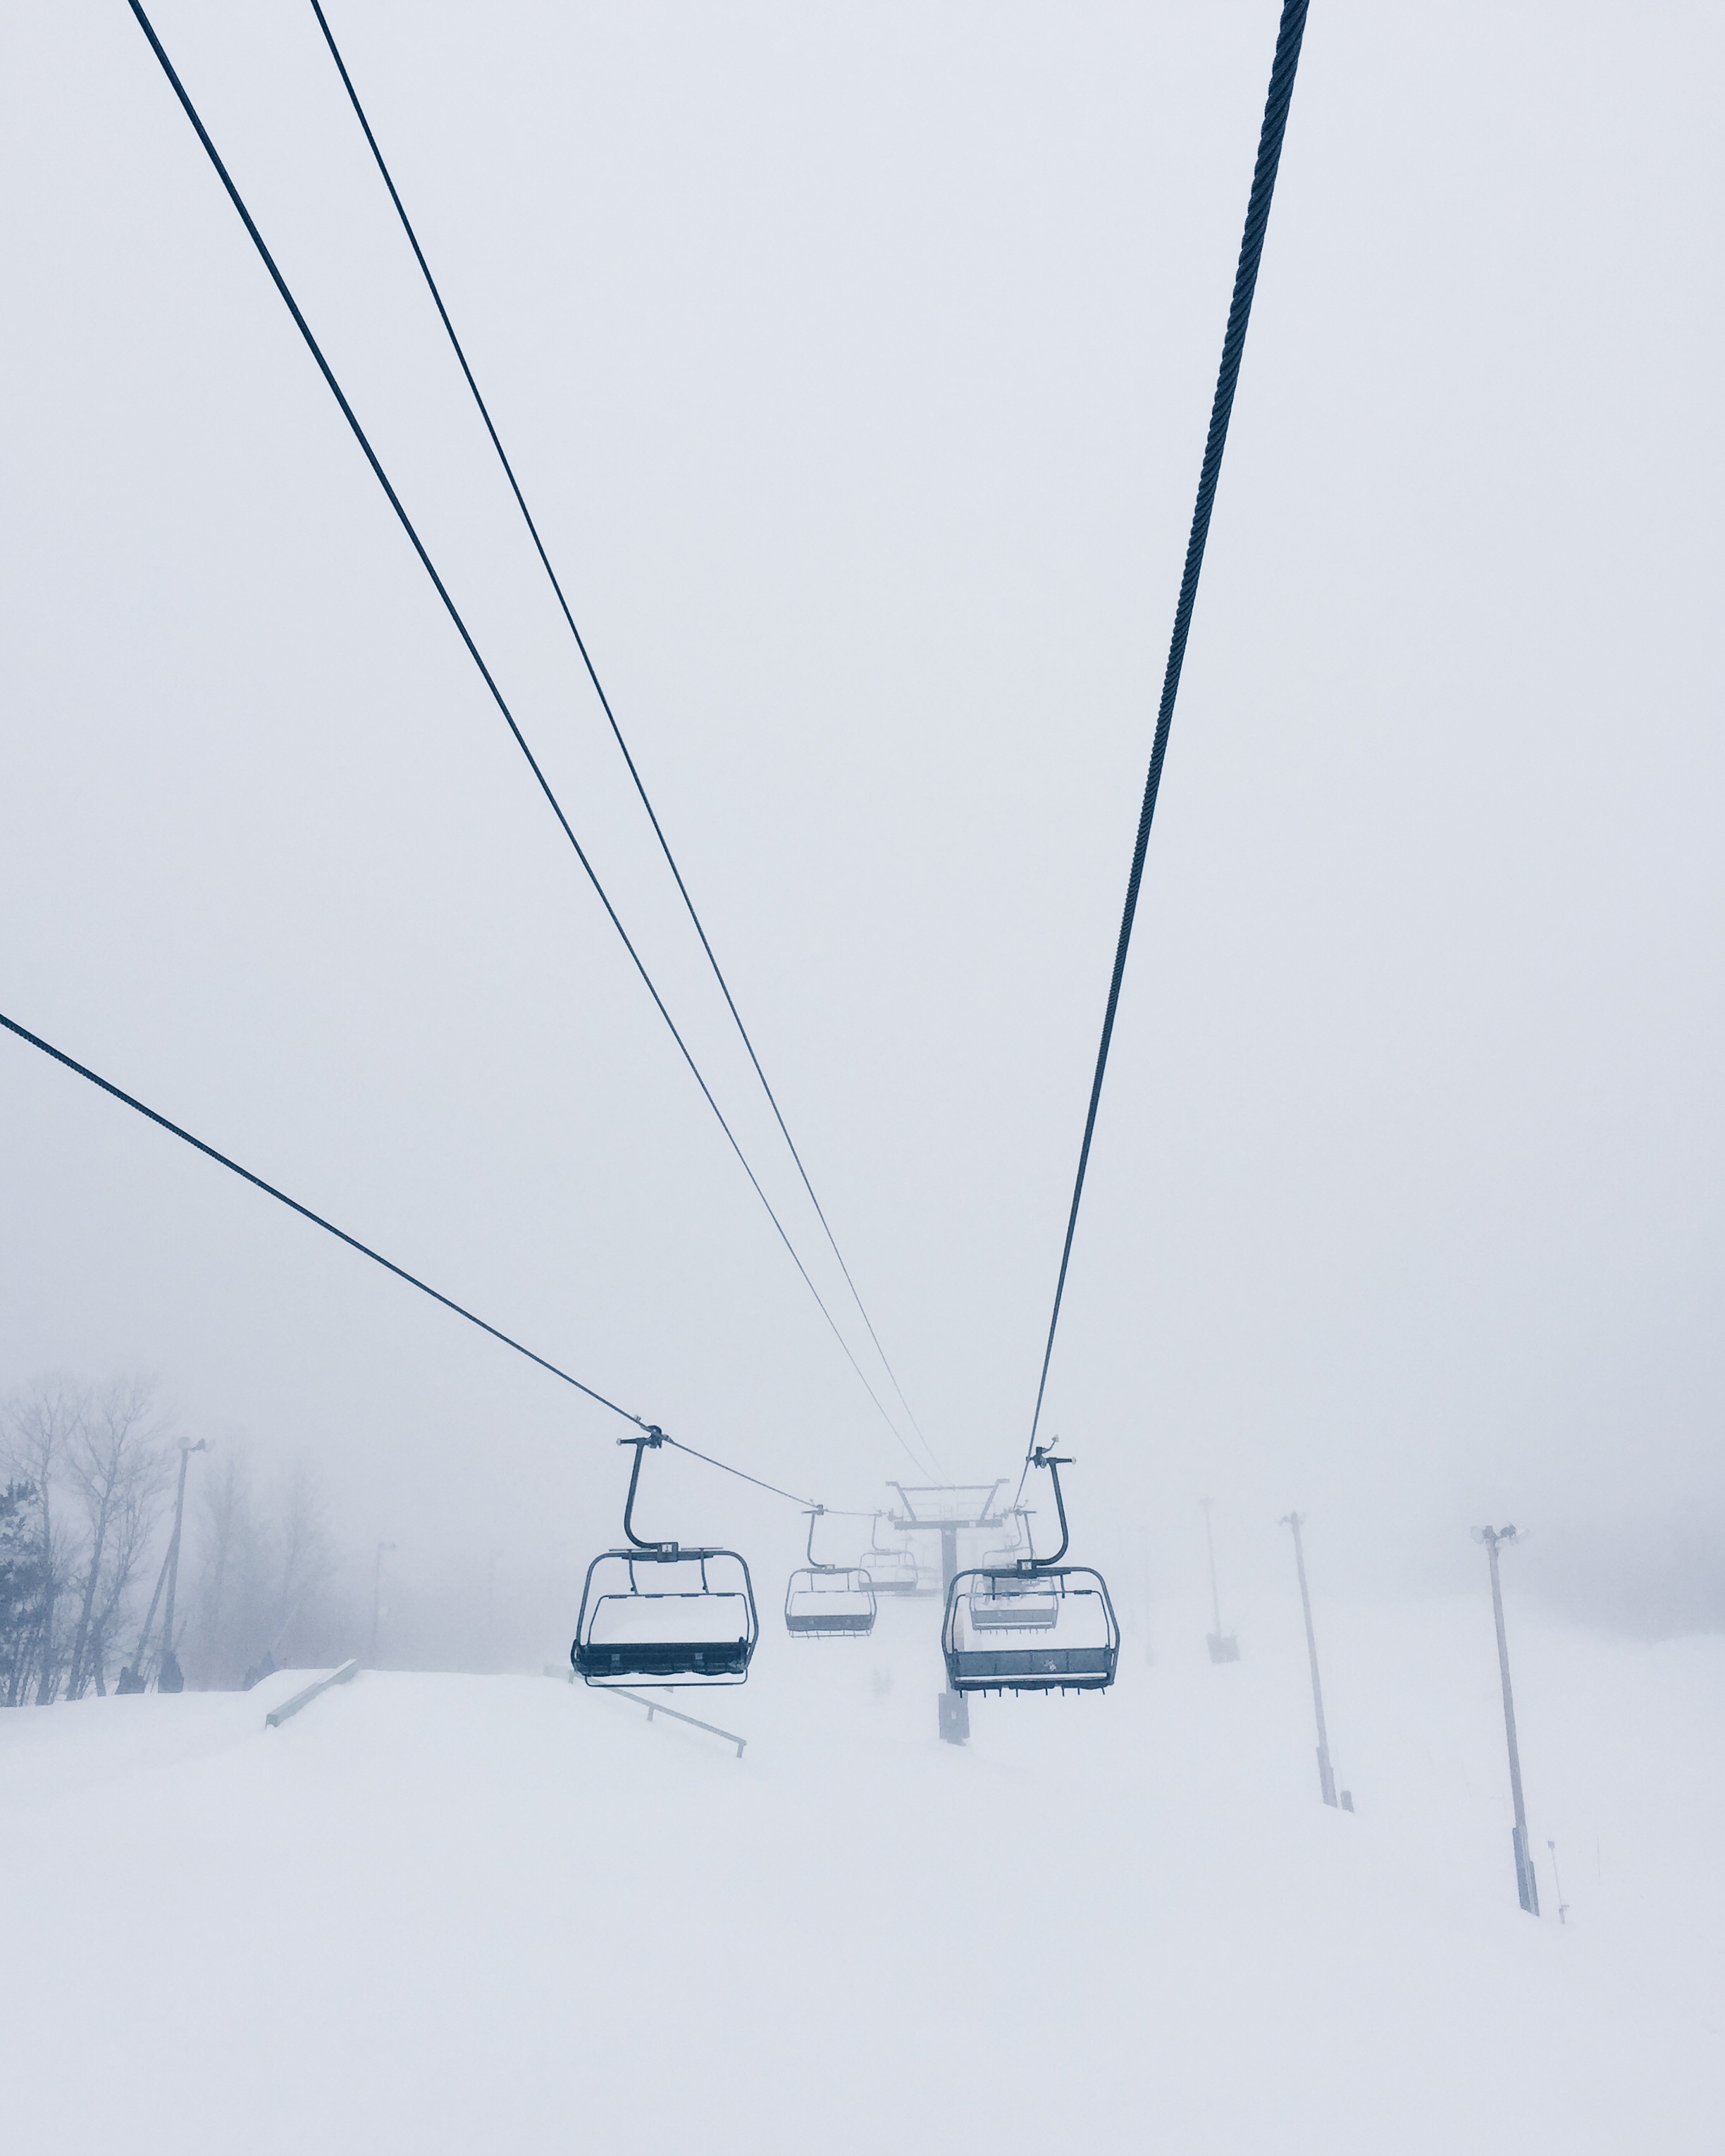 black cable cars in snow coated land